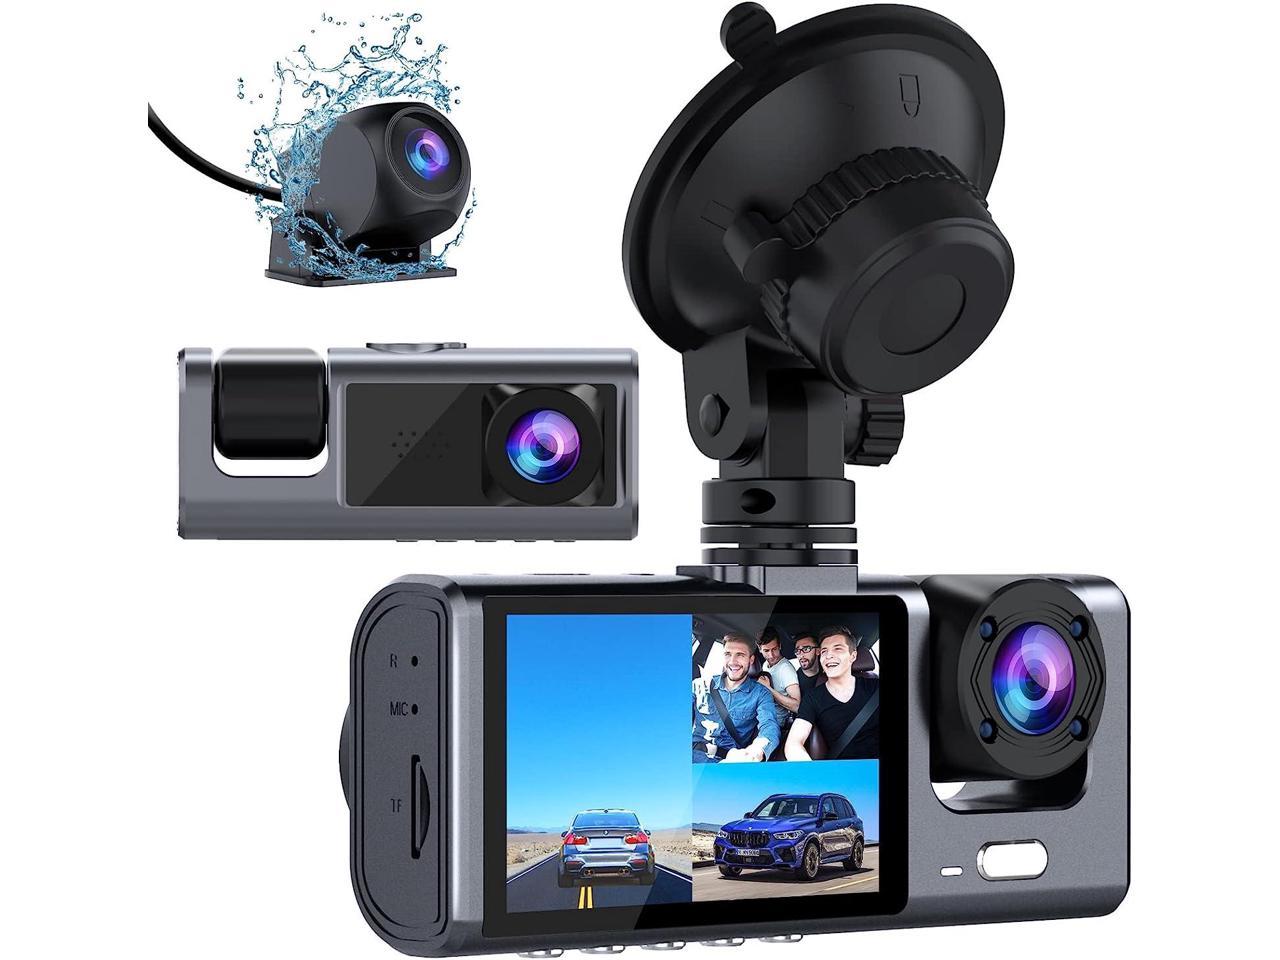 bus Monnik Verpletteren 3 Channel Dash Cam Front and Rear Inside, 1080P Dash Camera for Cars,  Dashcam Three Way Triple Car Camera with IR Night Vision, Loop Recording,  G-Sensor, Parking Monitor, 24 Hours Recording -